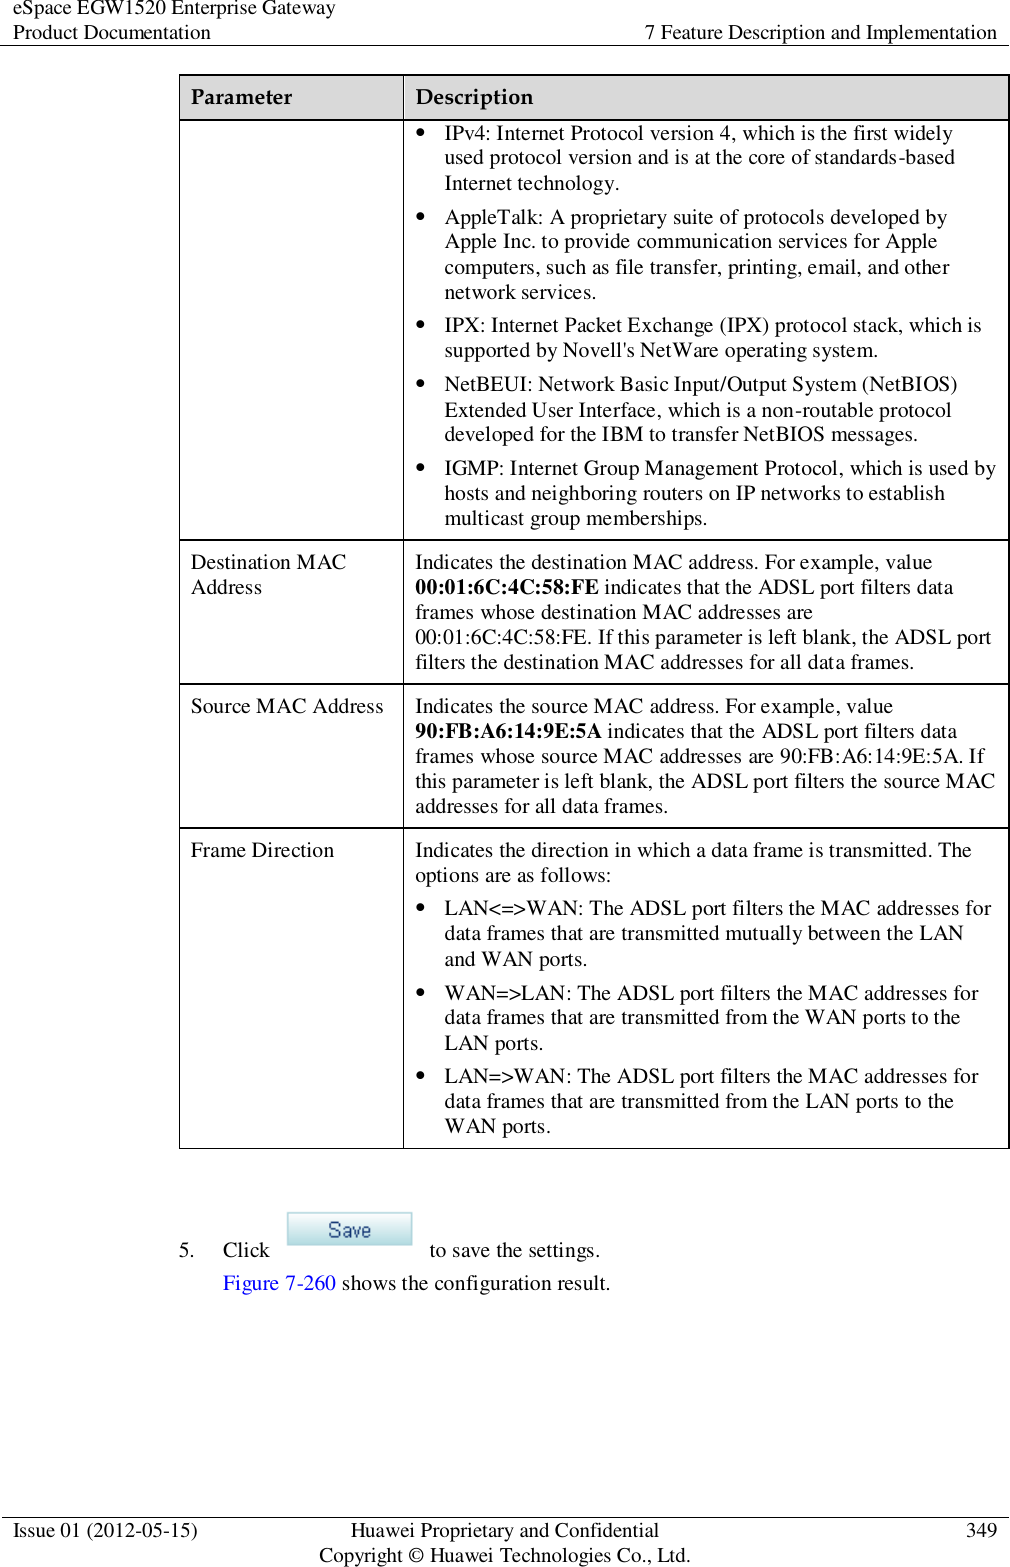 eSpace EGW1520 Enterprise Gateway Product Documentation 7 Feature Description and Implementation  Issue 01 (2012-05-15) Huawei Proprietary and Confidential                                     Copyright © Huawei Technologies Co., Ltd. 349  Parameter Description  IPv4: Internet Protocol version 4, which is the first widely used protocol version and is at the core of standards-based Internet technology.  AppleTalk: A proprietary suite of protocols developed by Apple Inc. to provide communication services for Apple computers, such as file transfer, printing, email, and other network services.  IPX: Internet Packet Exchange (IPX) protocol stack, which is supported by Novell&apos;s NetWare operating system.  NetBEUI: Network Basic Input/Output System (NetBIOS) Extended User Interface, which is a non-routable protocol developed for the IBM to transfer NetBIOS messages.  IGMP: Internet Group Management Protocol, which is used by hosts and neighboring routers on IP networks to establish multicast group memberships. Destination MAC Address Indicates the destination MAC address. For example, value 00:01:6C:4C:58:FE indicates that the ADSL port filters data frames whose destination MAC addresses are 00:01:6C:4C:58:FE. If this parameter is left blank, the ADSL port filters the destination MAC addresses for all data frames. Source MAC Address Indicates the source MAC address. For example, value 90:FB:A6:14:9E:5A indicates that the ADSL port filters data frames whose source MAC addresses are 90:FB:A6:14:9E:5A. If this parameter is left blank, the ADSL port filters the source MAC addresses for all data frames. Frame Direction Indicates the direction in which a data frame is transmitted. The options are as follows:  LAN&lt;=&gt;WAN: The ADSL port filters the MAC addresses for data frames that are transmitted mutually between the LAN and WAN ports.  WAN=&gt;LAN: The ADSL port filters the MAC addresses for data frames that are transmitted from the WAN ports to the LAN ports.  LAN=&gt;WAN: The ADSL port filters the MAC addresses for data frames that are transmitted from the LAN ports to the WAN ports.  5. Click    to save the settings. Figure 7-260 shows the configuration result. 